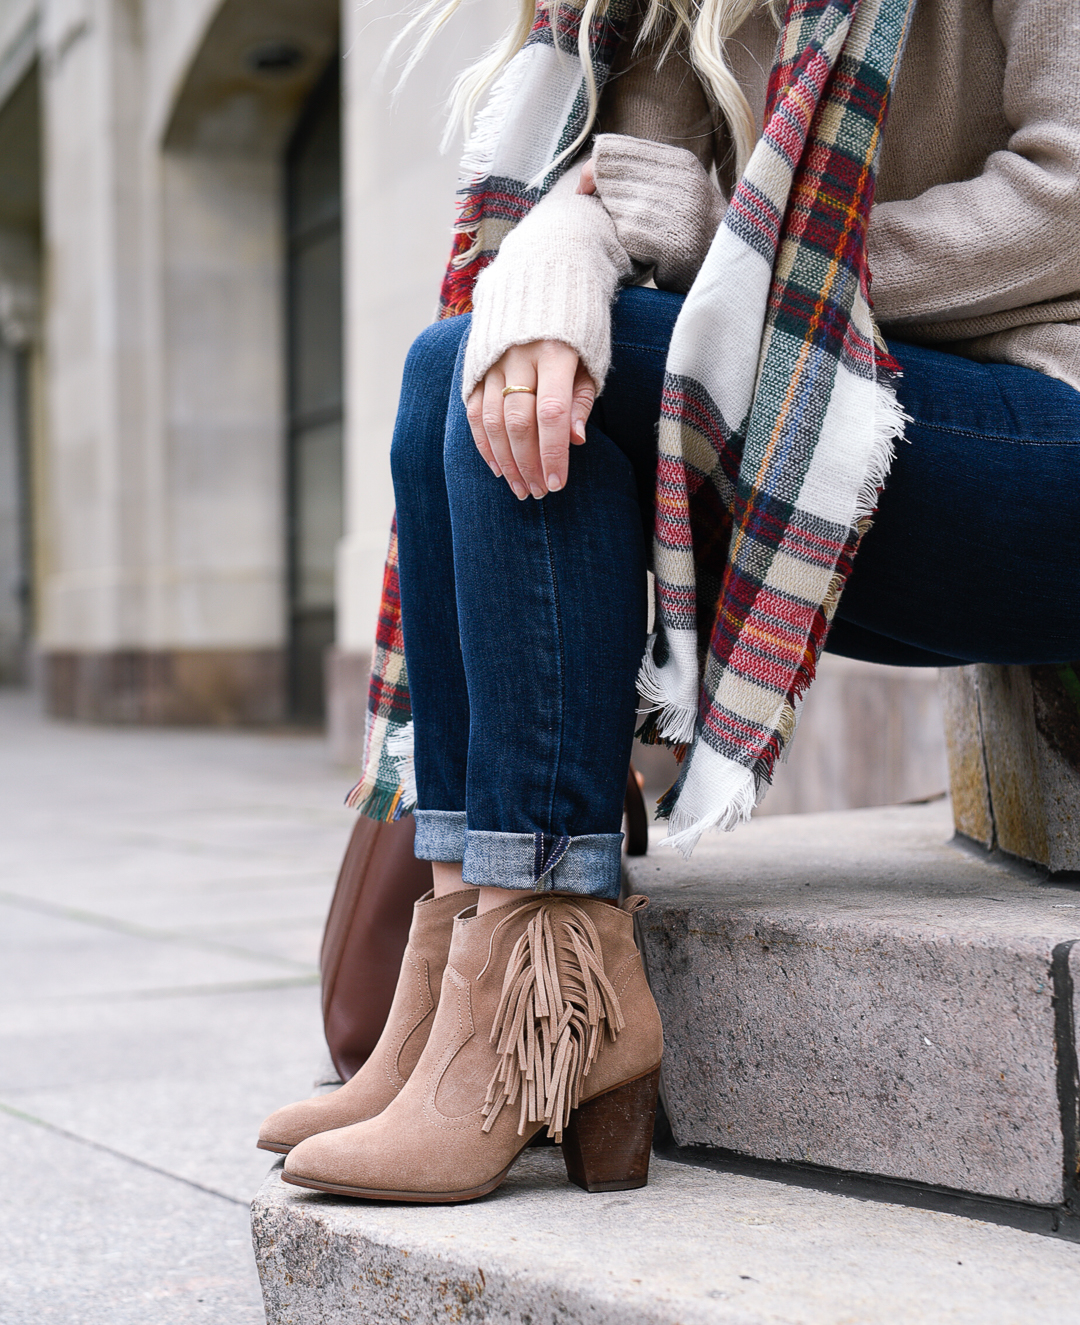 Fringe booties and a plaid scarf.